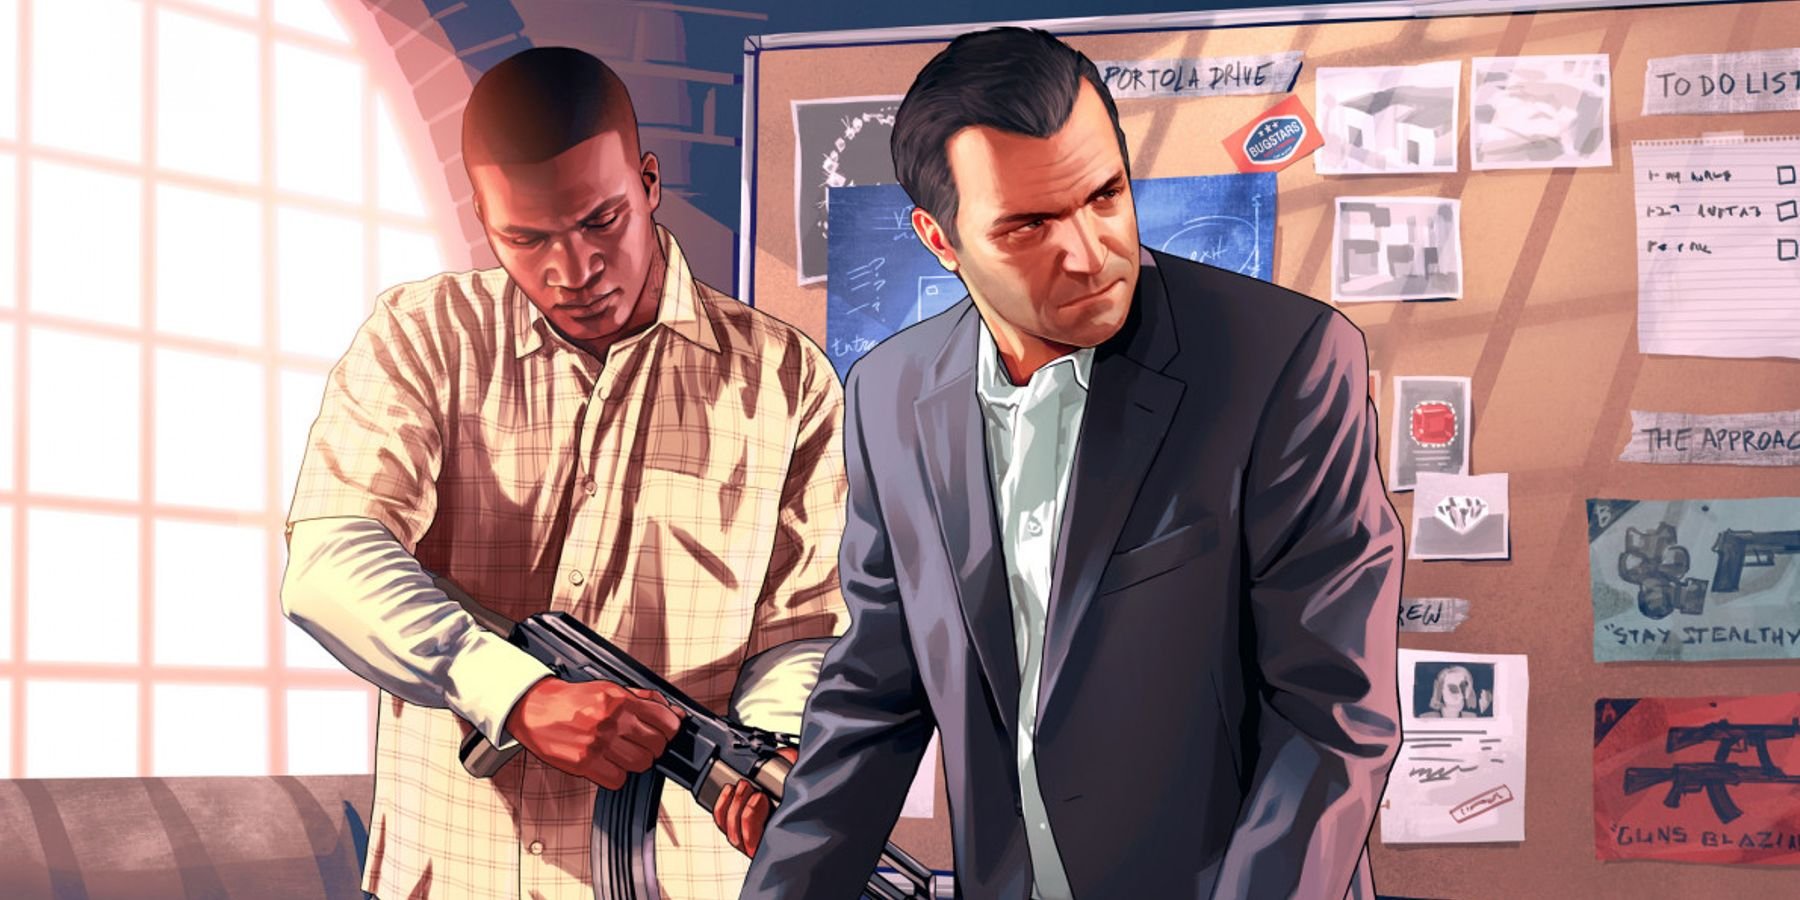 Grand Theft Auto 5 PS5 Trailer Seemingly 'Censors' Content Found in Original